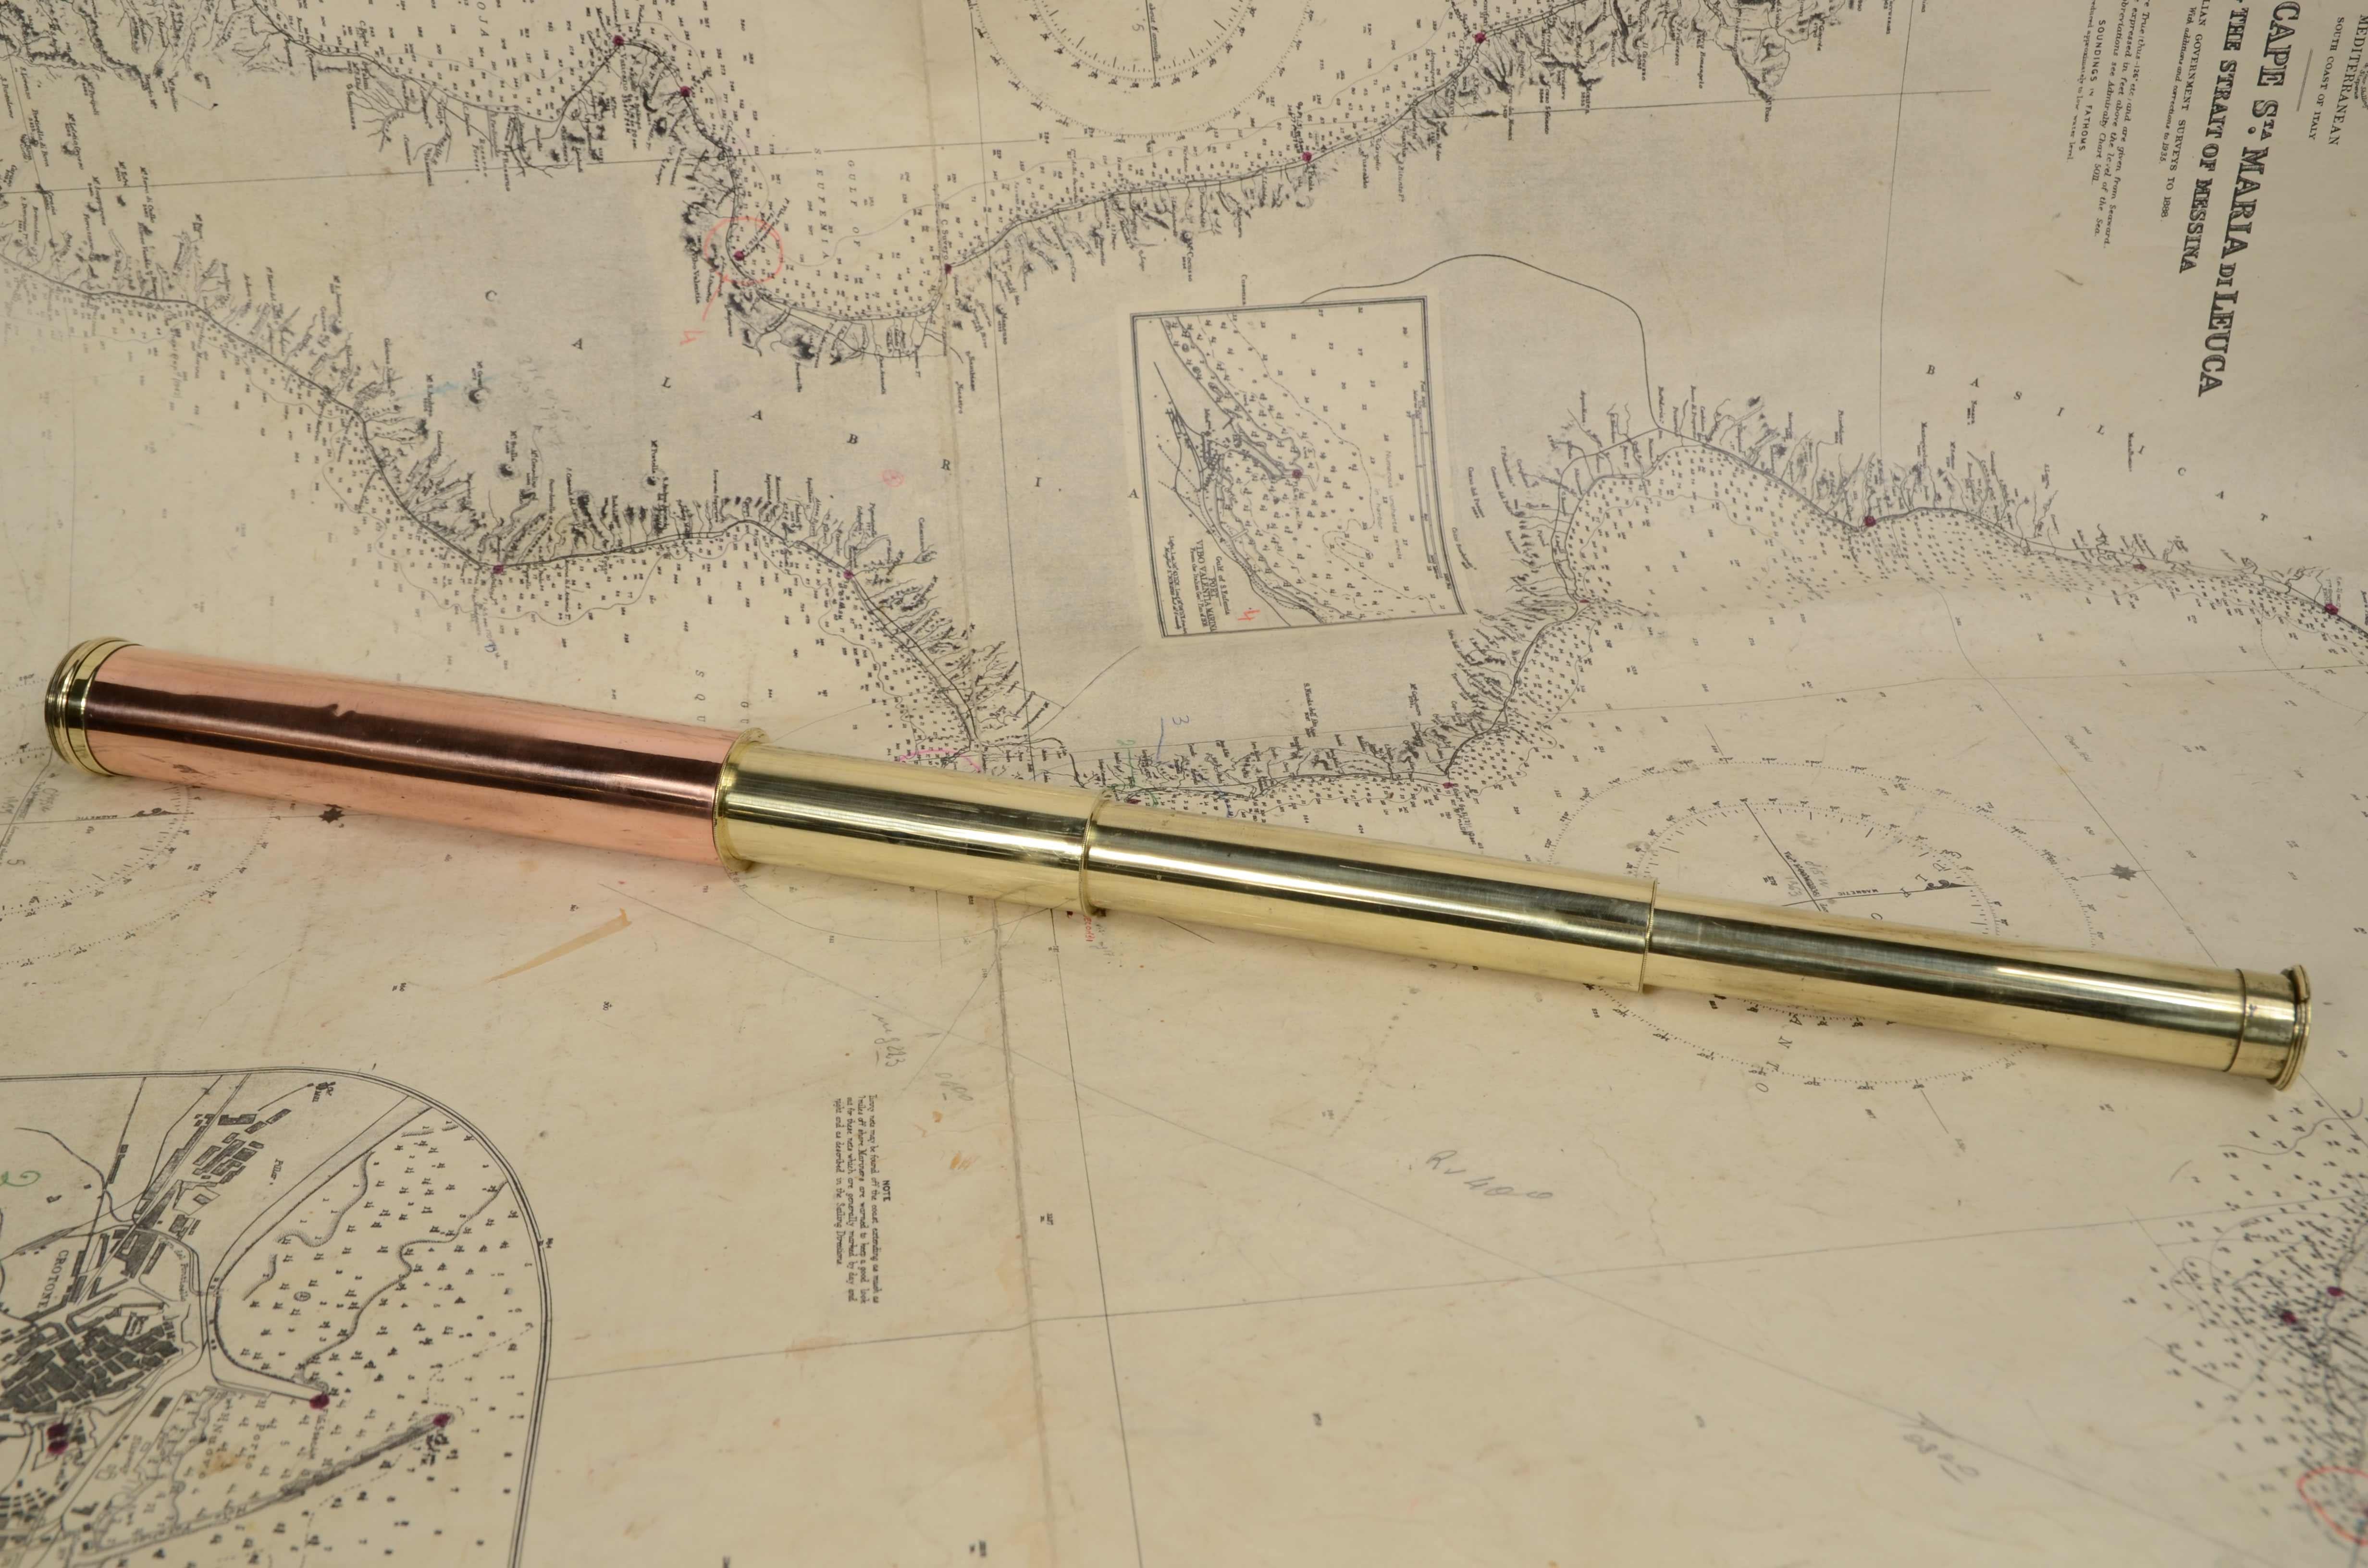 Brass telescope with copper handle, three-extension focus. English manufacture of the second half of the 19th century. Maximum length 62 cm, inches 23.4,  minimum cm 20,- inches 7.9 focal diameter cm 3 - inches 1.2. Good condition, fully functional